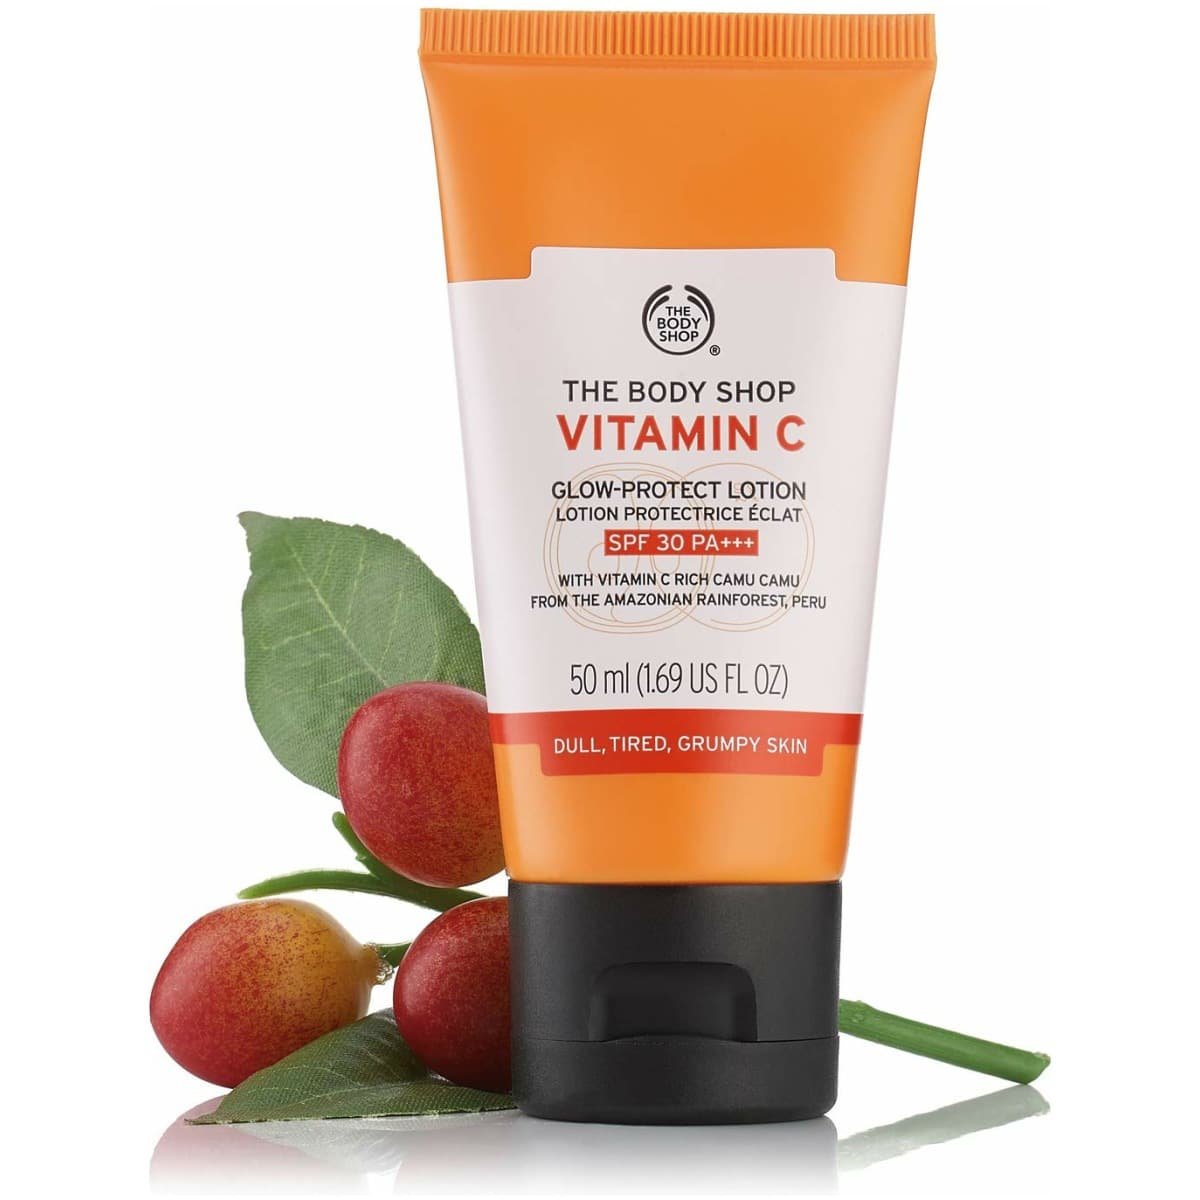 The Body Shop Vitamin C Glow Protect Lotion Spf 30 Pa+++ 50Ml